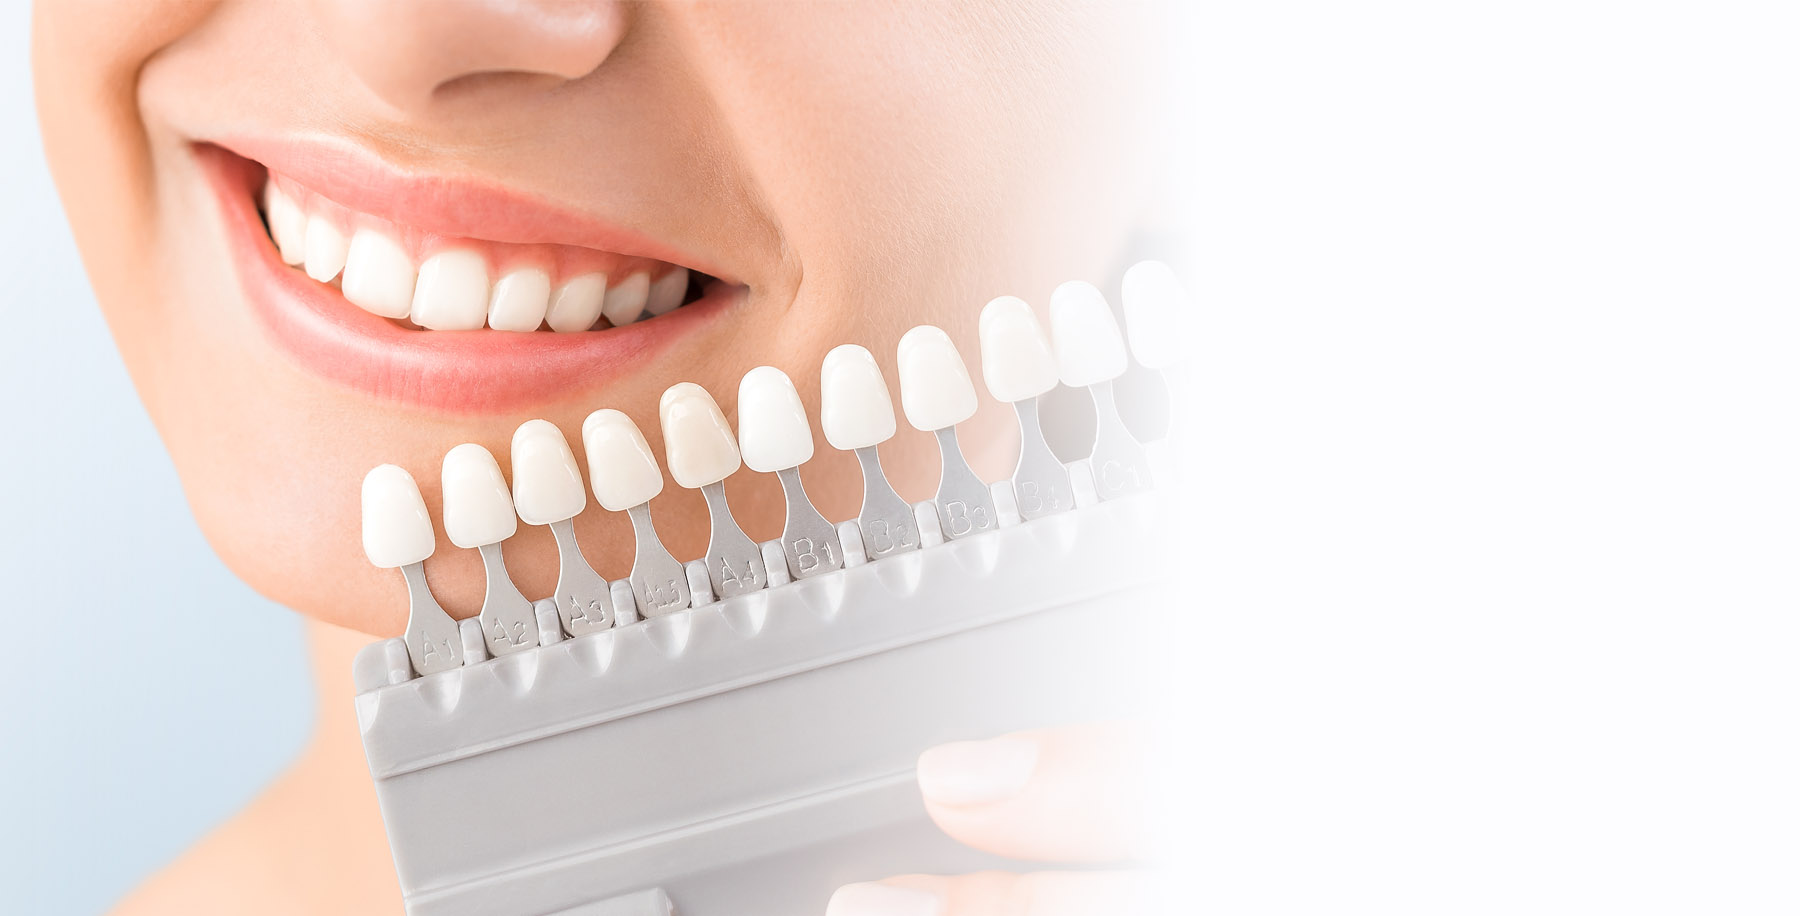 Special pricing available for Teeth whitening